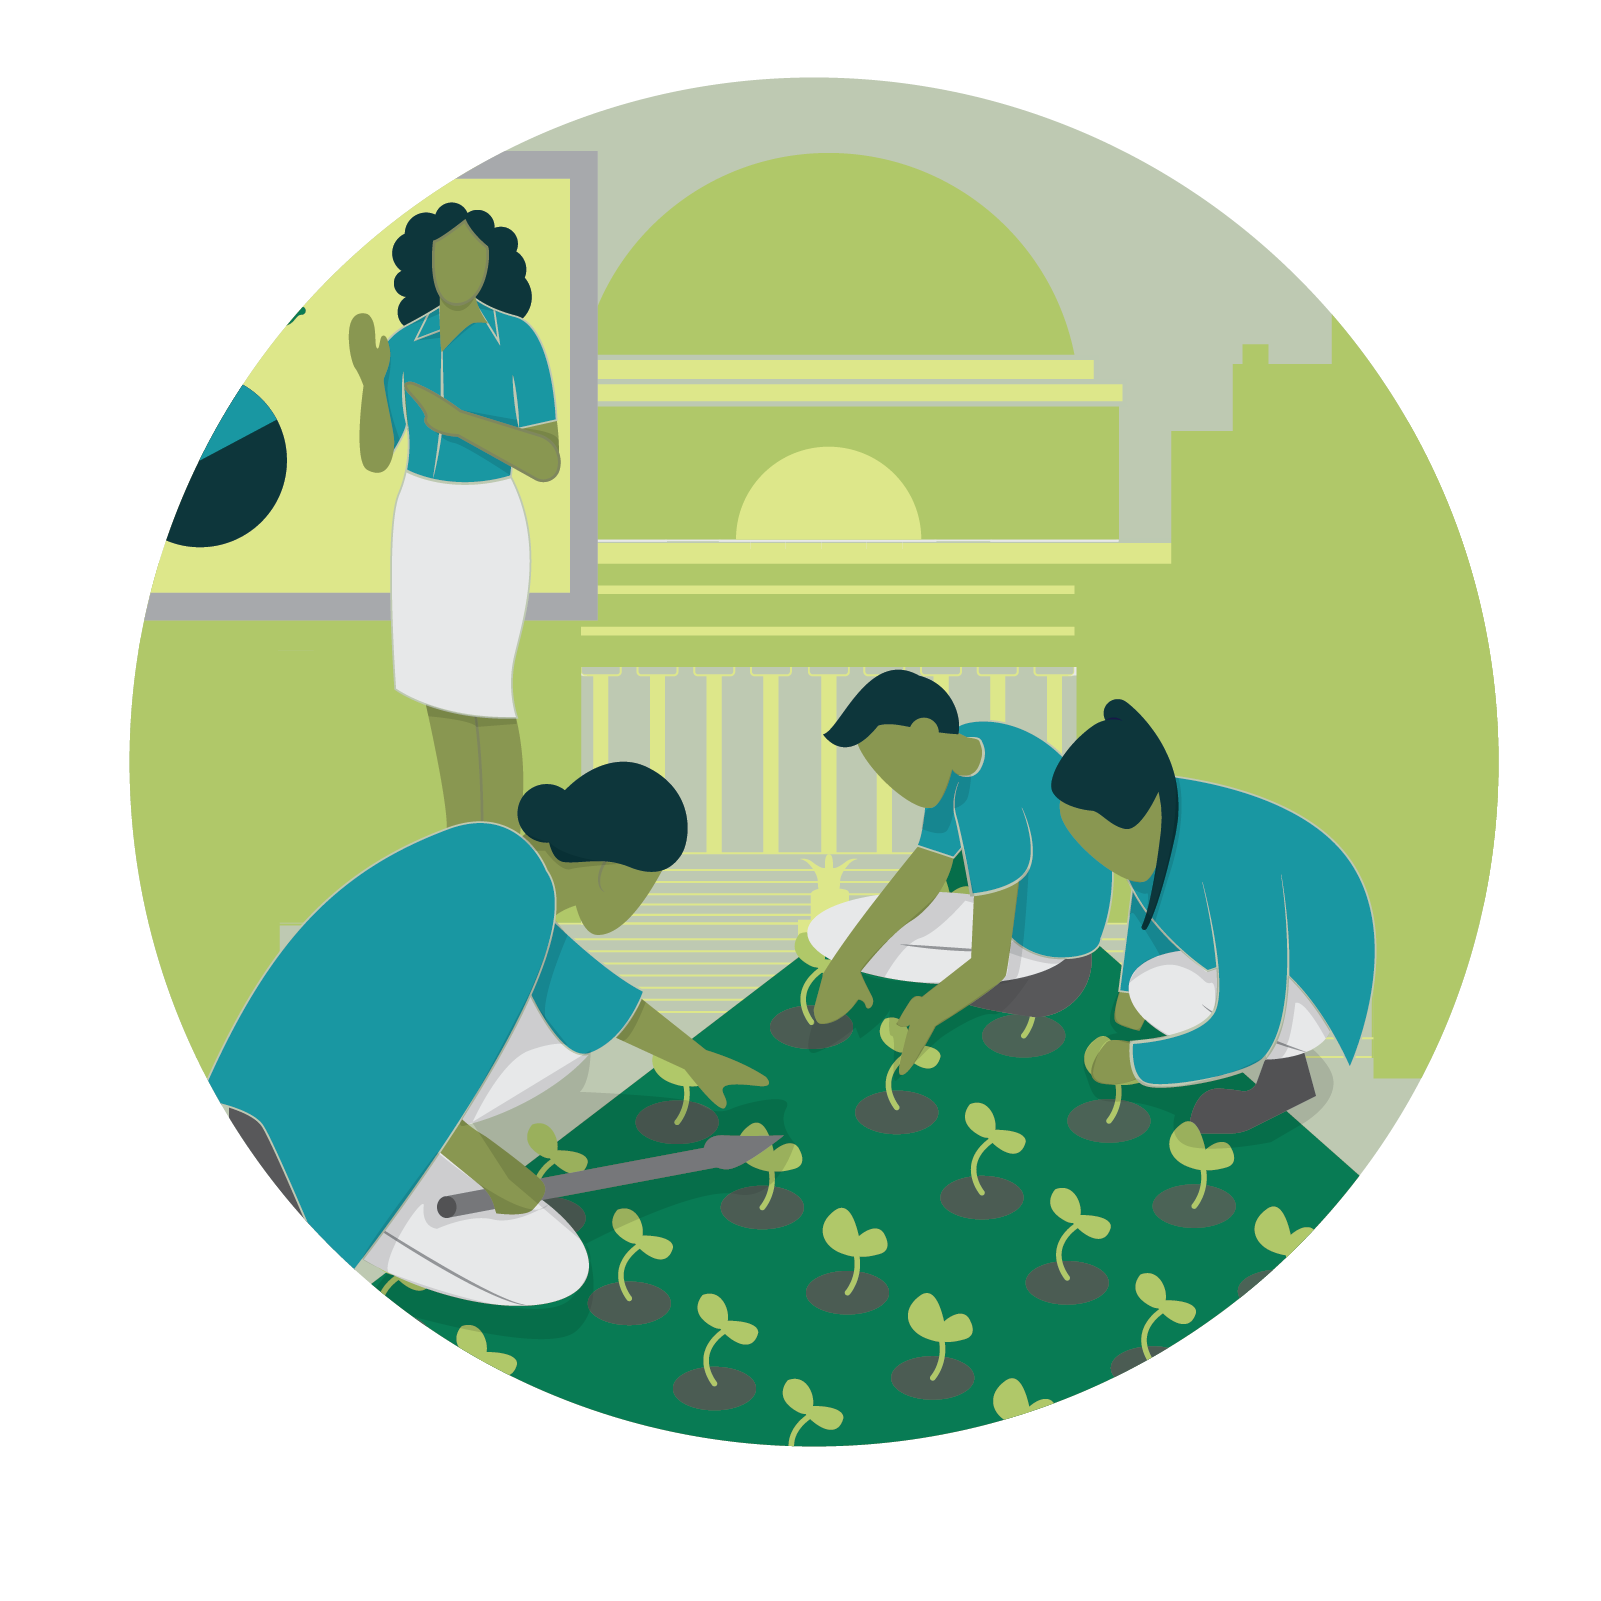 An infographic showing people farming with a teacher in the background instructing them.